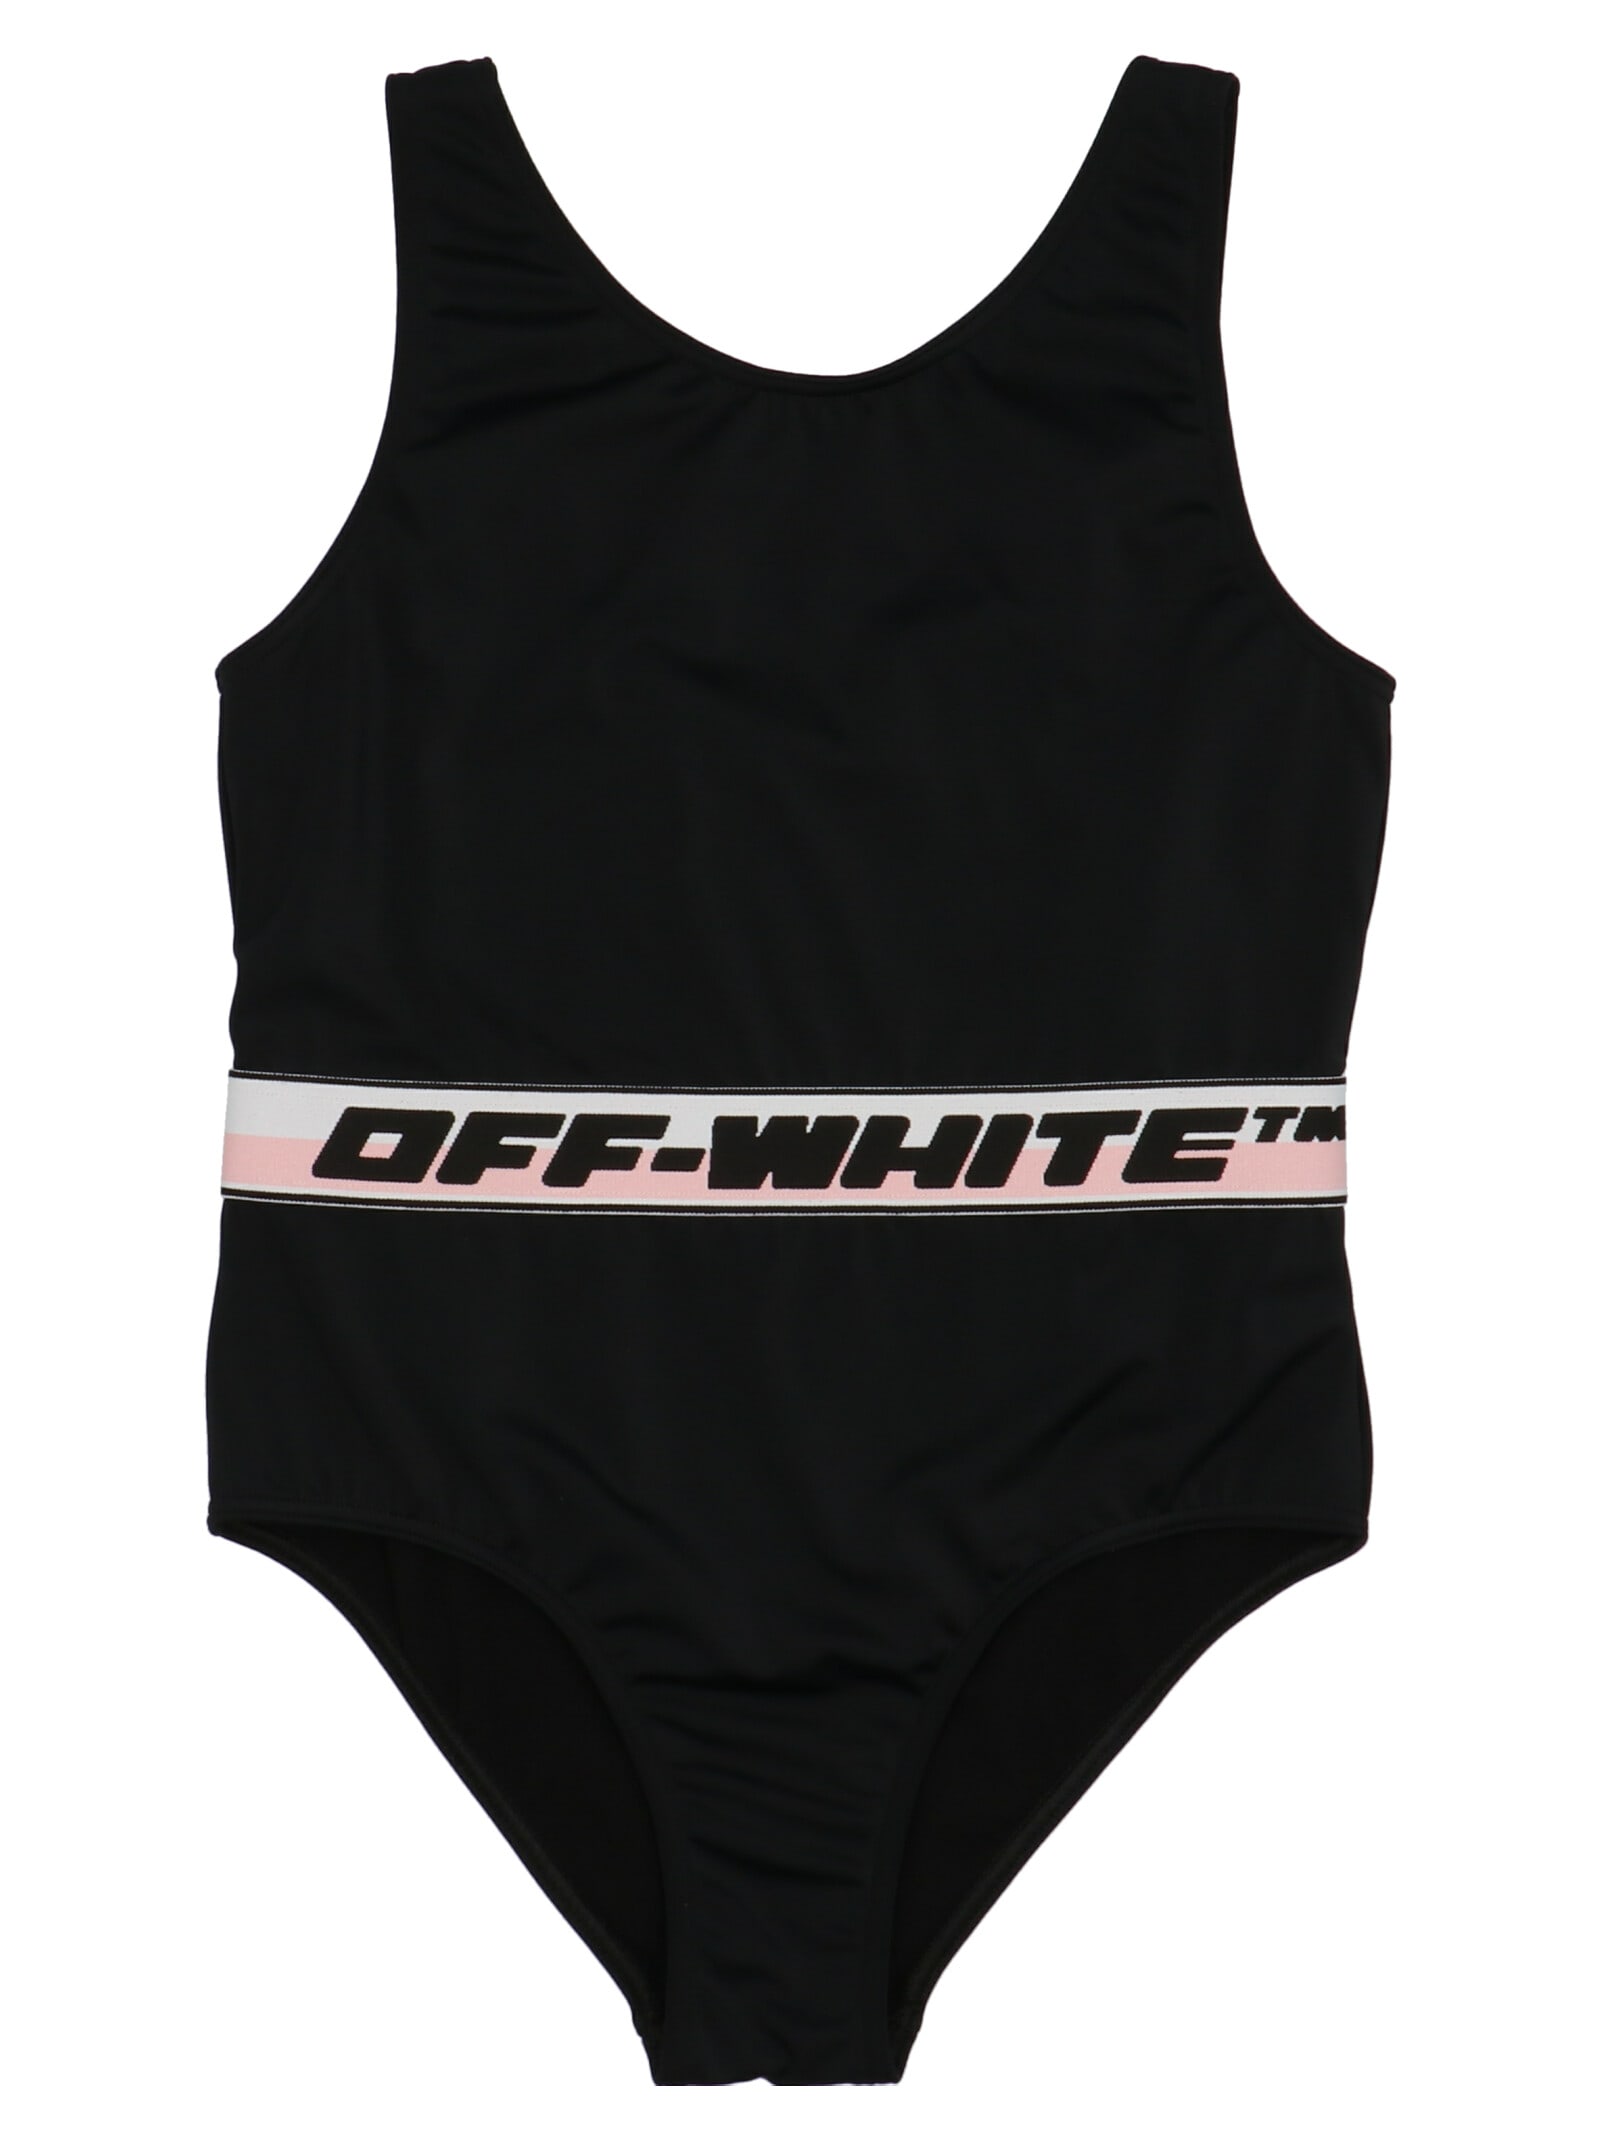 Off-White logo Band One-piece Swimsuit